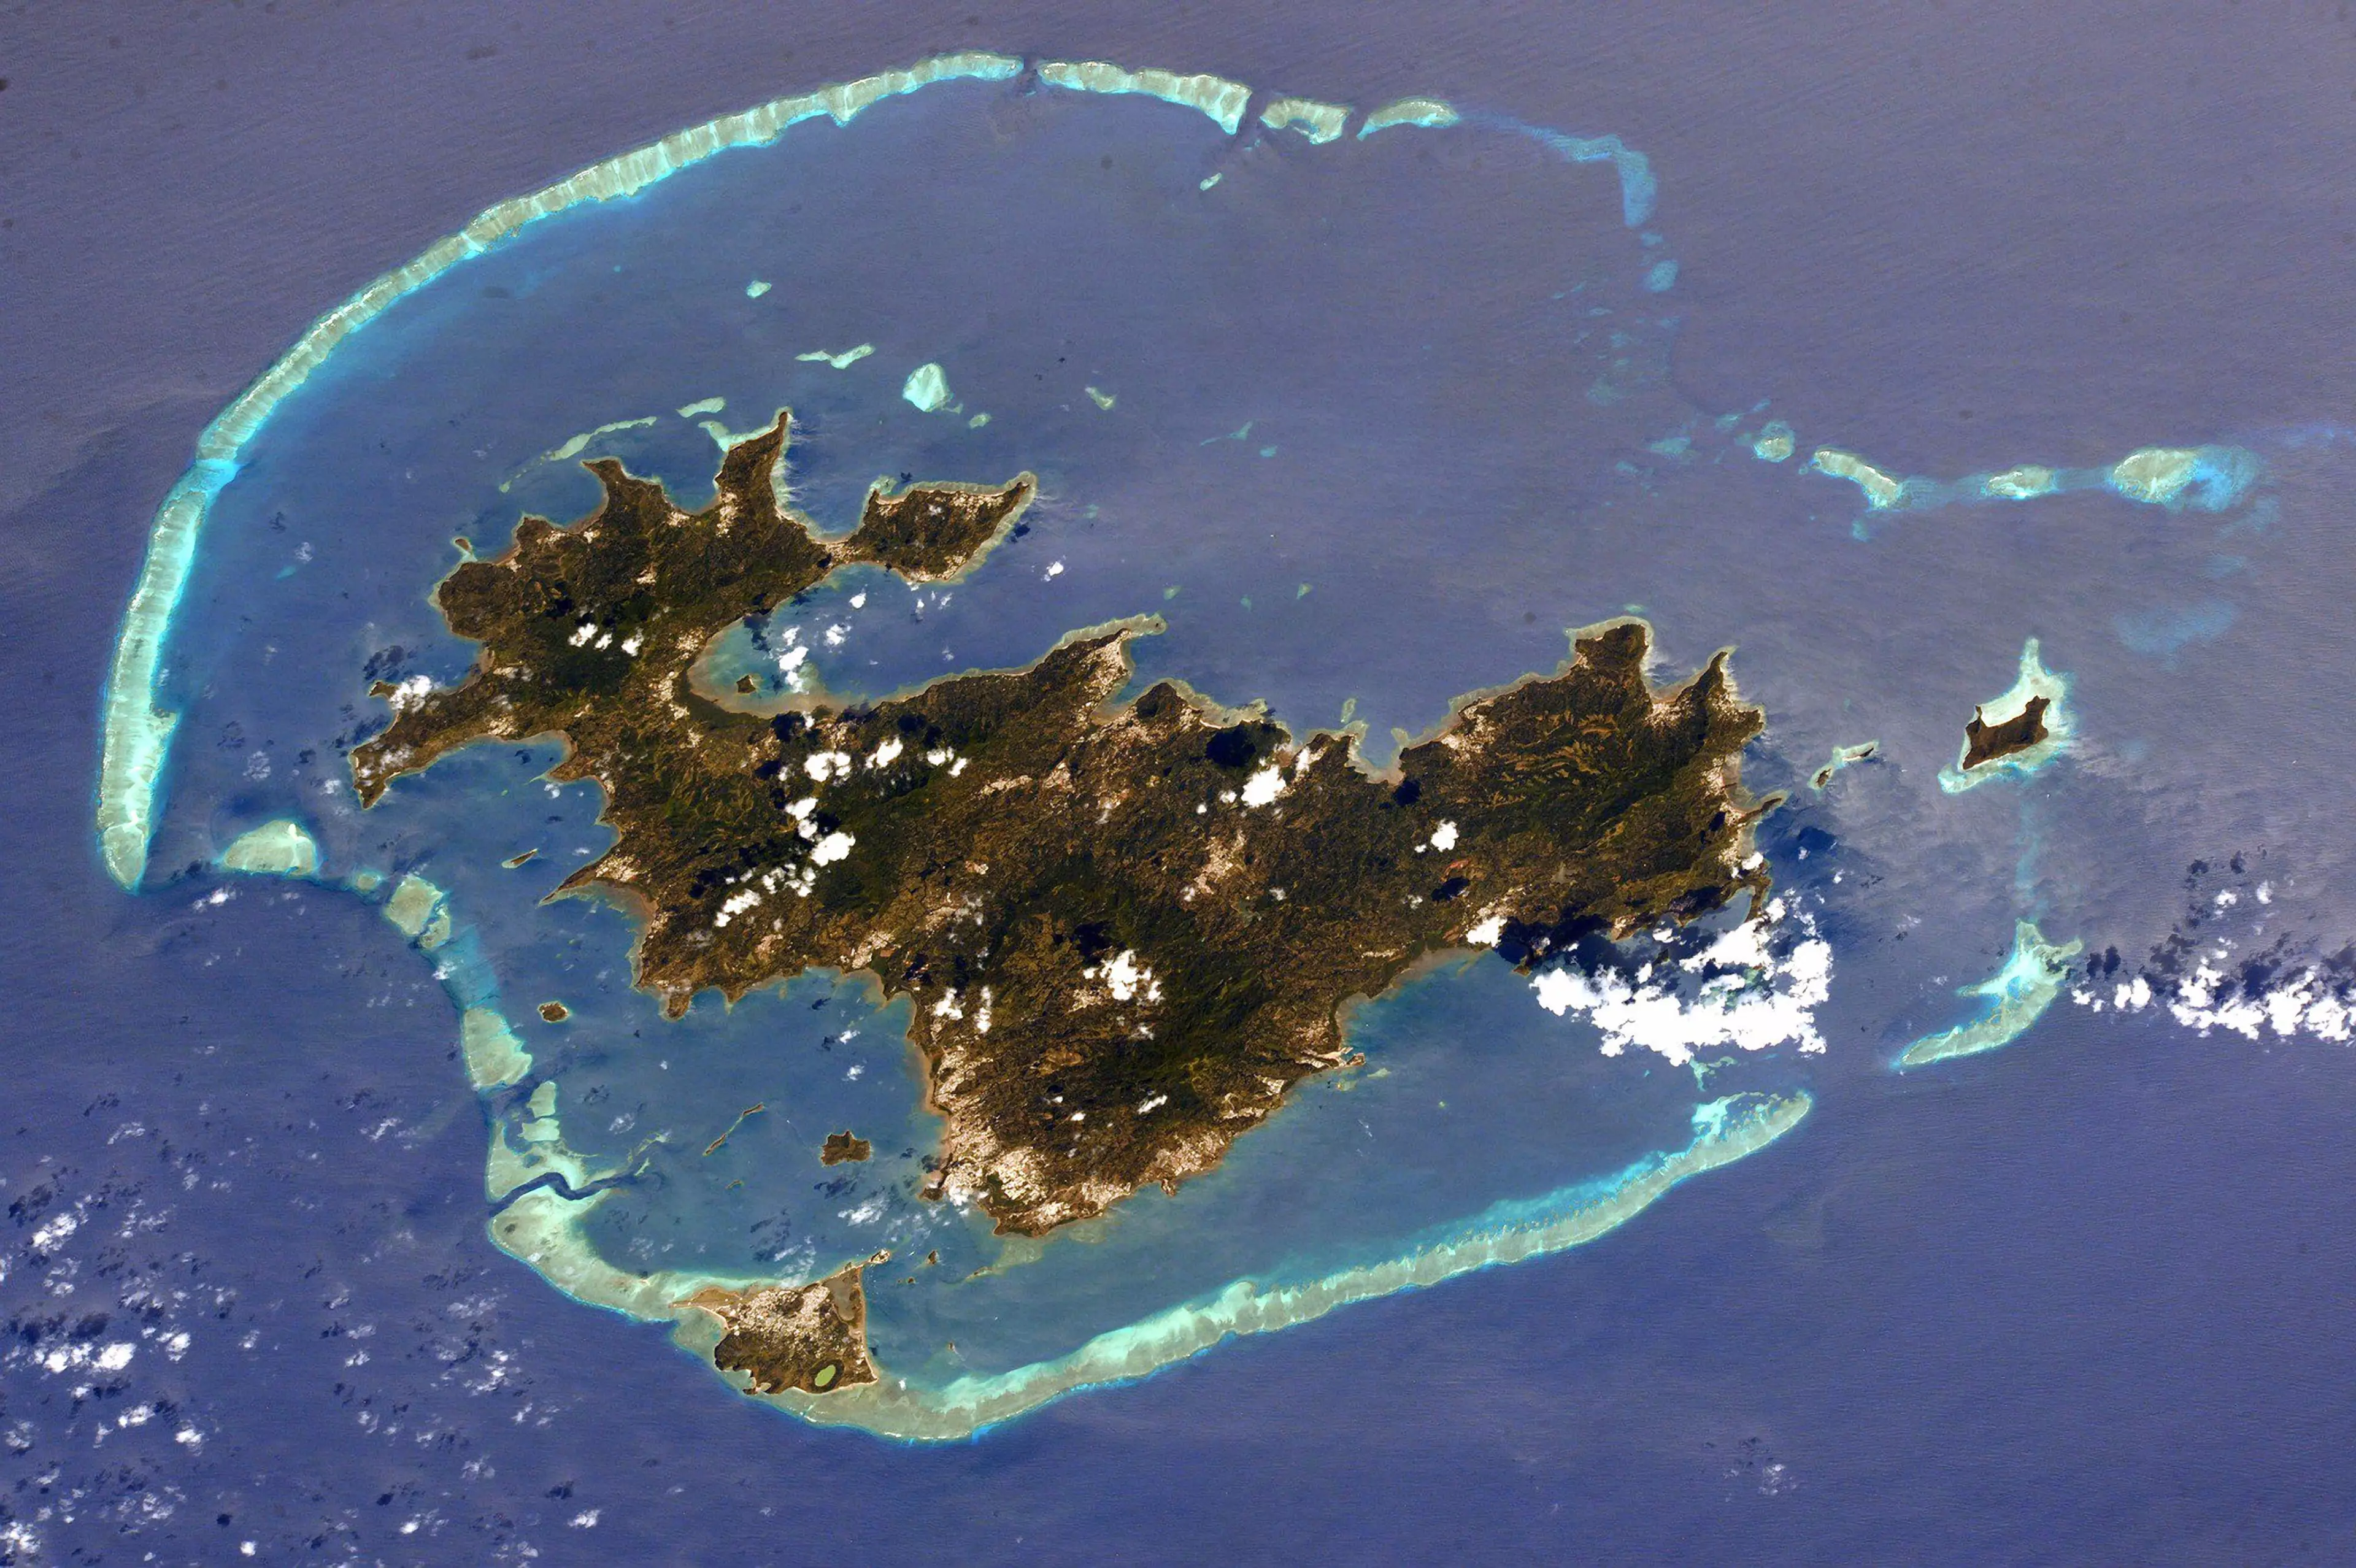 Mayotte Island from space.